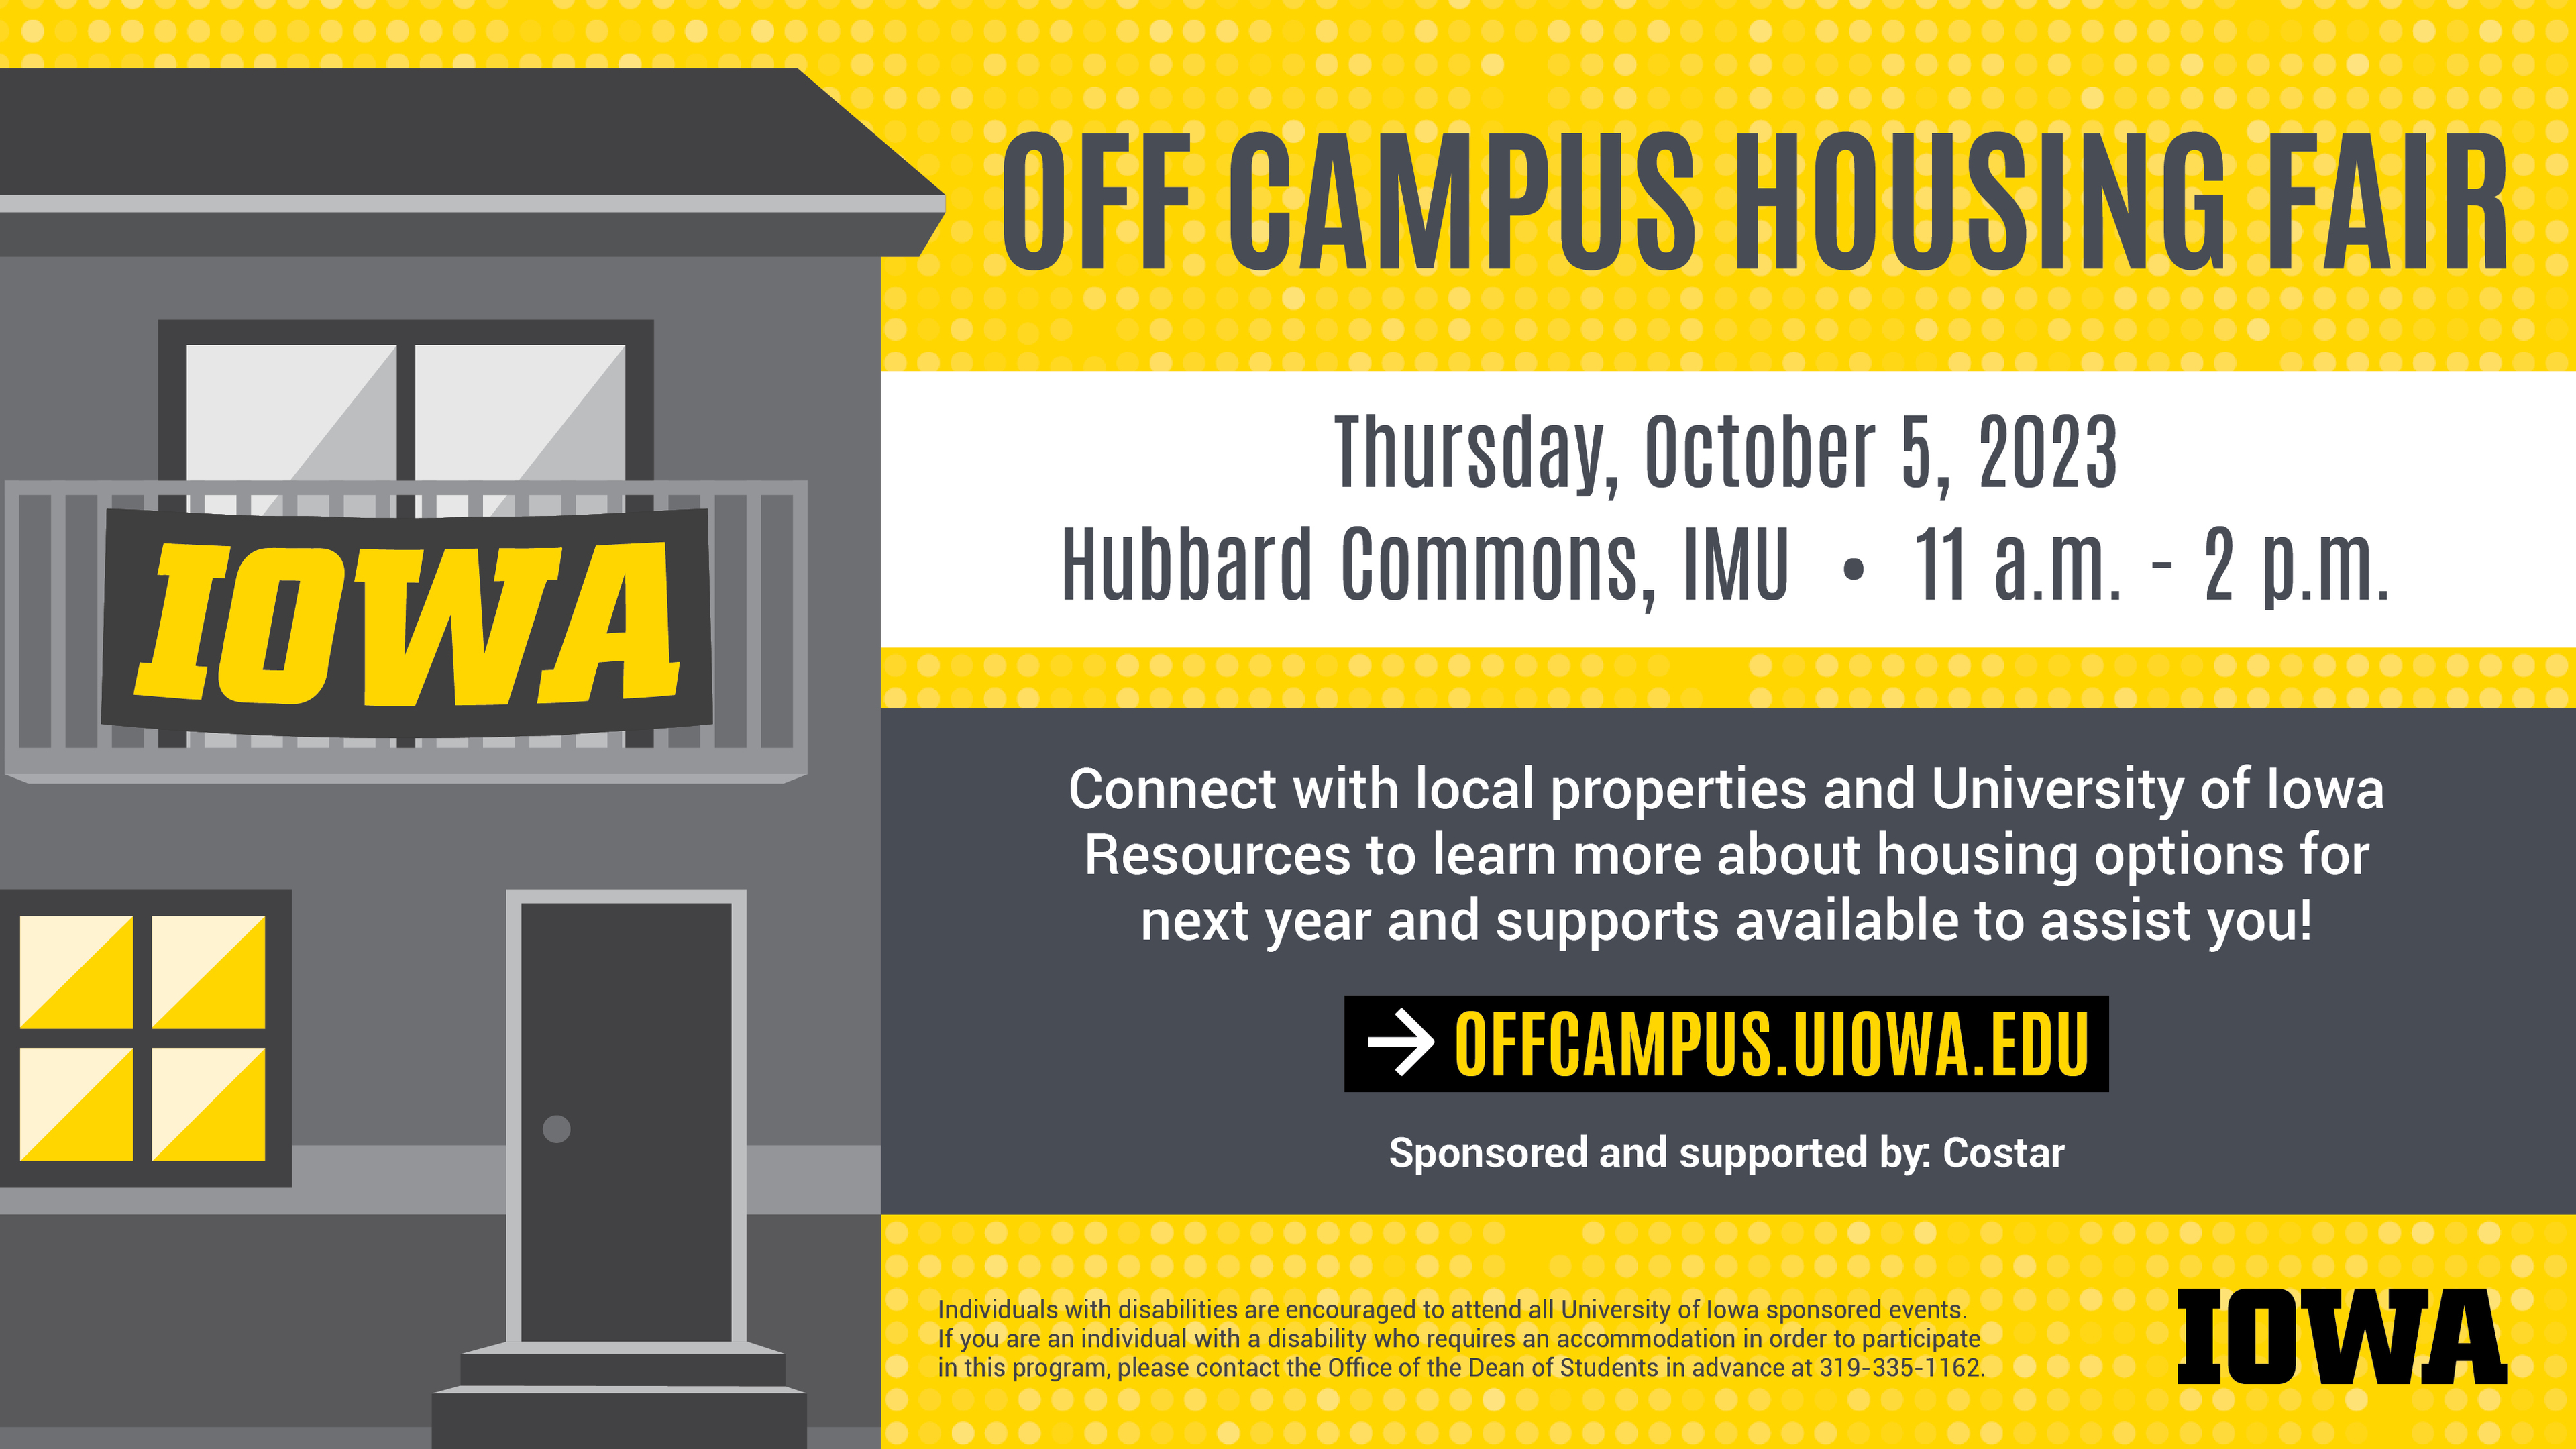 Off Campus Housing Fair Thursday October 5 in the IMU from 11 a.m. - 2 p.m.